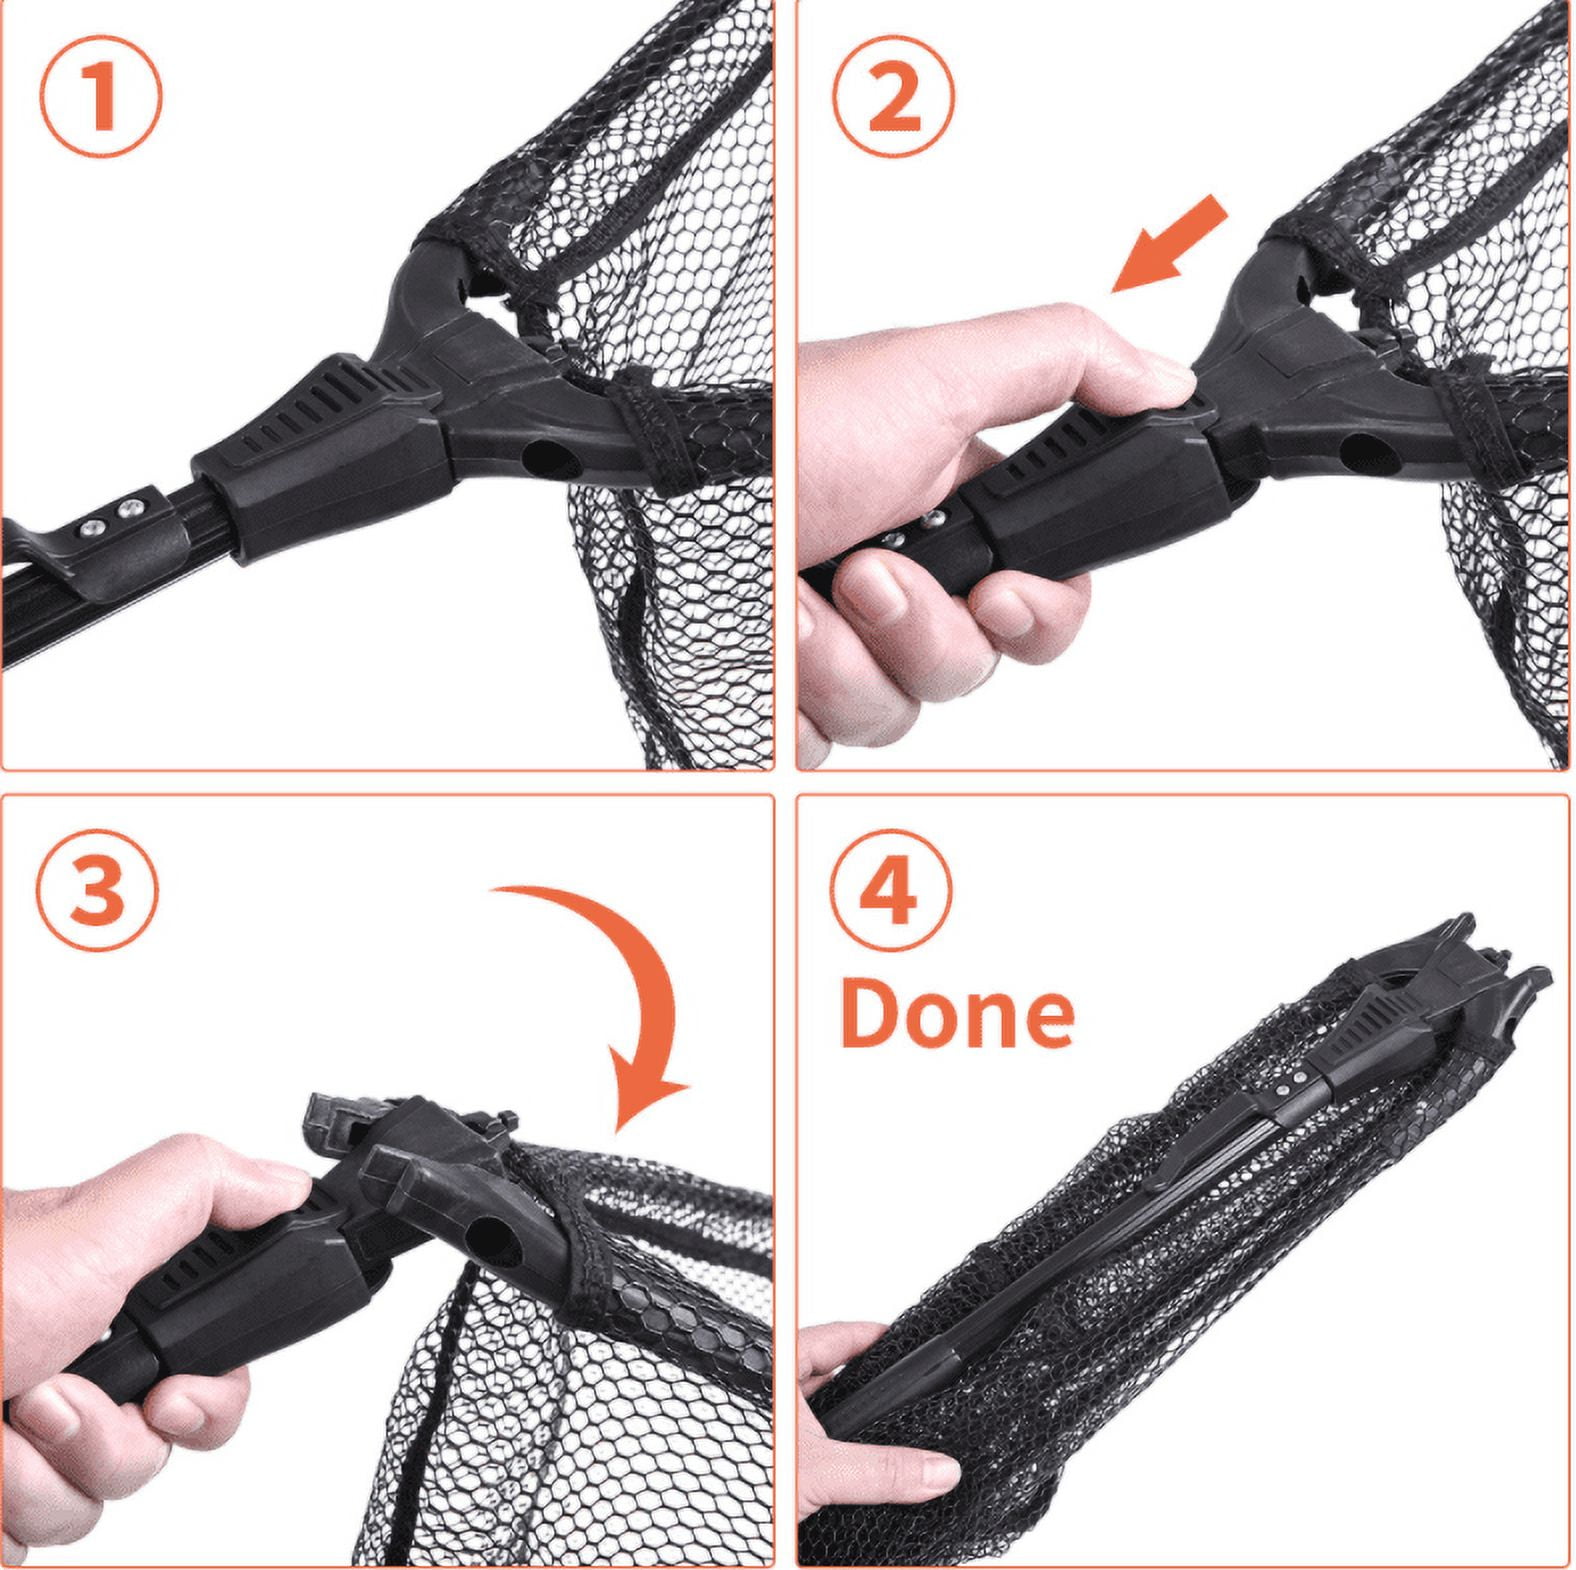 Sports and tourismFloating Fishing Net, Collapsible Fishing Nets with  Telescopic Pole Handle, Easy Catch & Release of Salmon, Fly, Kayak,  Catfish, Bass. The Versatile Fishing Accessory for Every Catch  Enthusiast!20.99 $